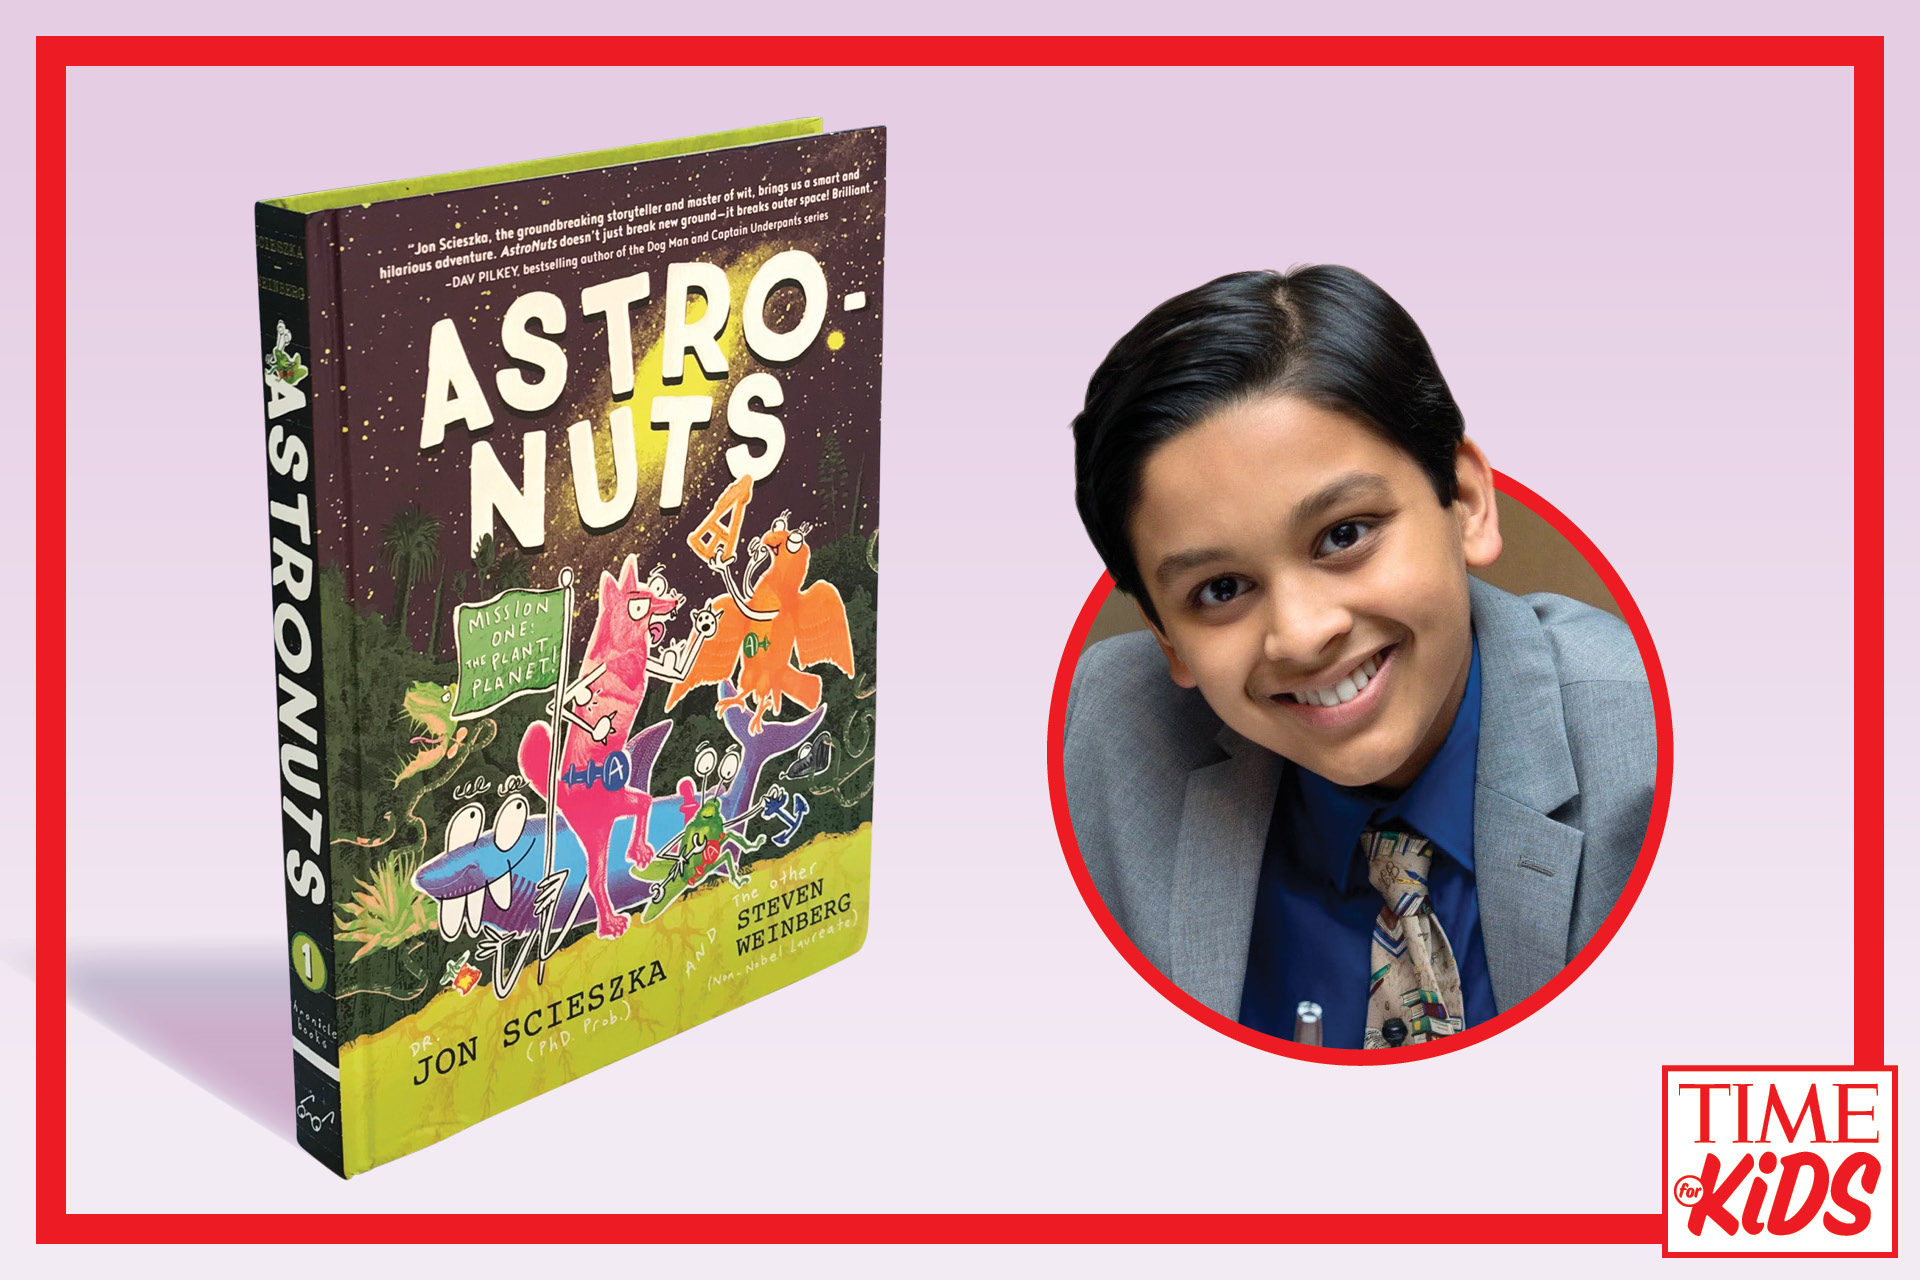 TFK Kid Reporter Eshaan Mani Reviews AstroNuts Mission One: The Plant Planet by Jon Scieszka illustrated by Steven Weinberg